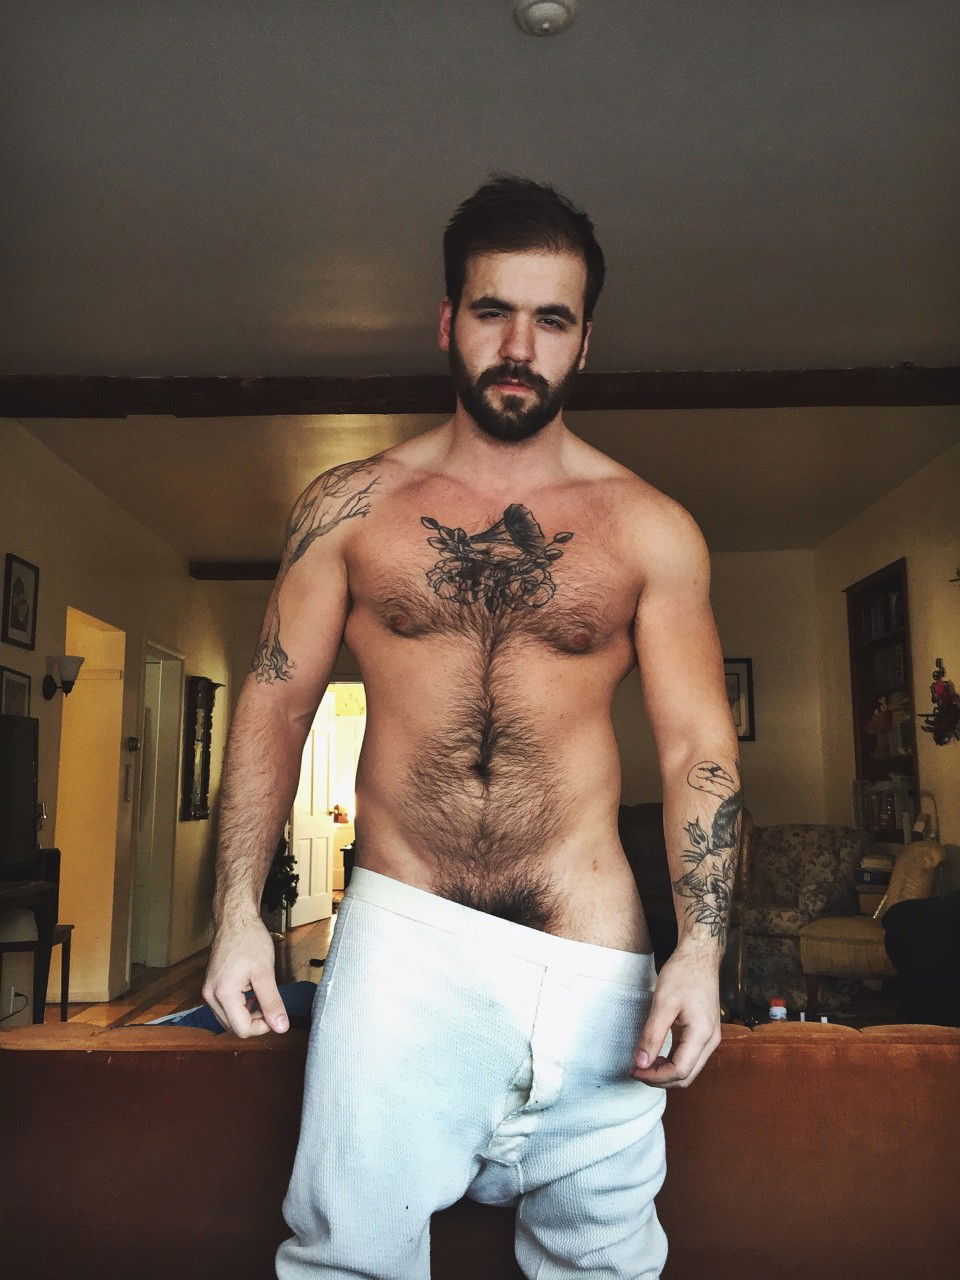 Photo by UKPornGay with the username @UKPornGay,  June 17, 2017 at 9:12 AM and the text says 'cuddlyuk-gay:

I generally reblog pics of guys with varying degrees of hair, if you want to check out some of the others, go to: http://cuddlyuk-gay.tumblr.com'